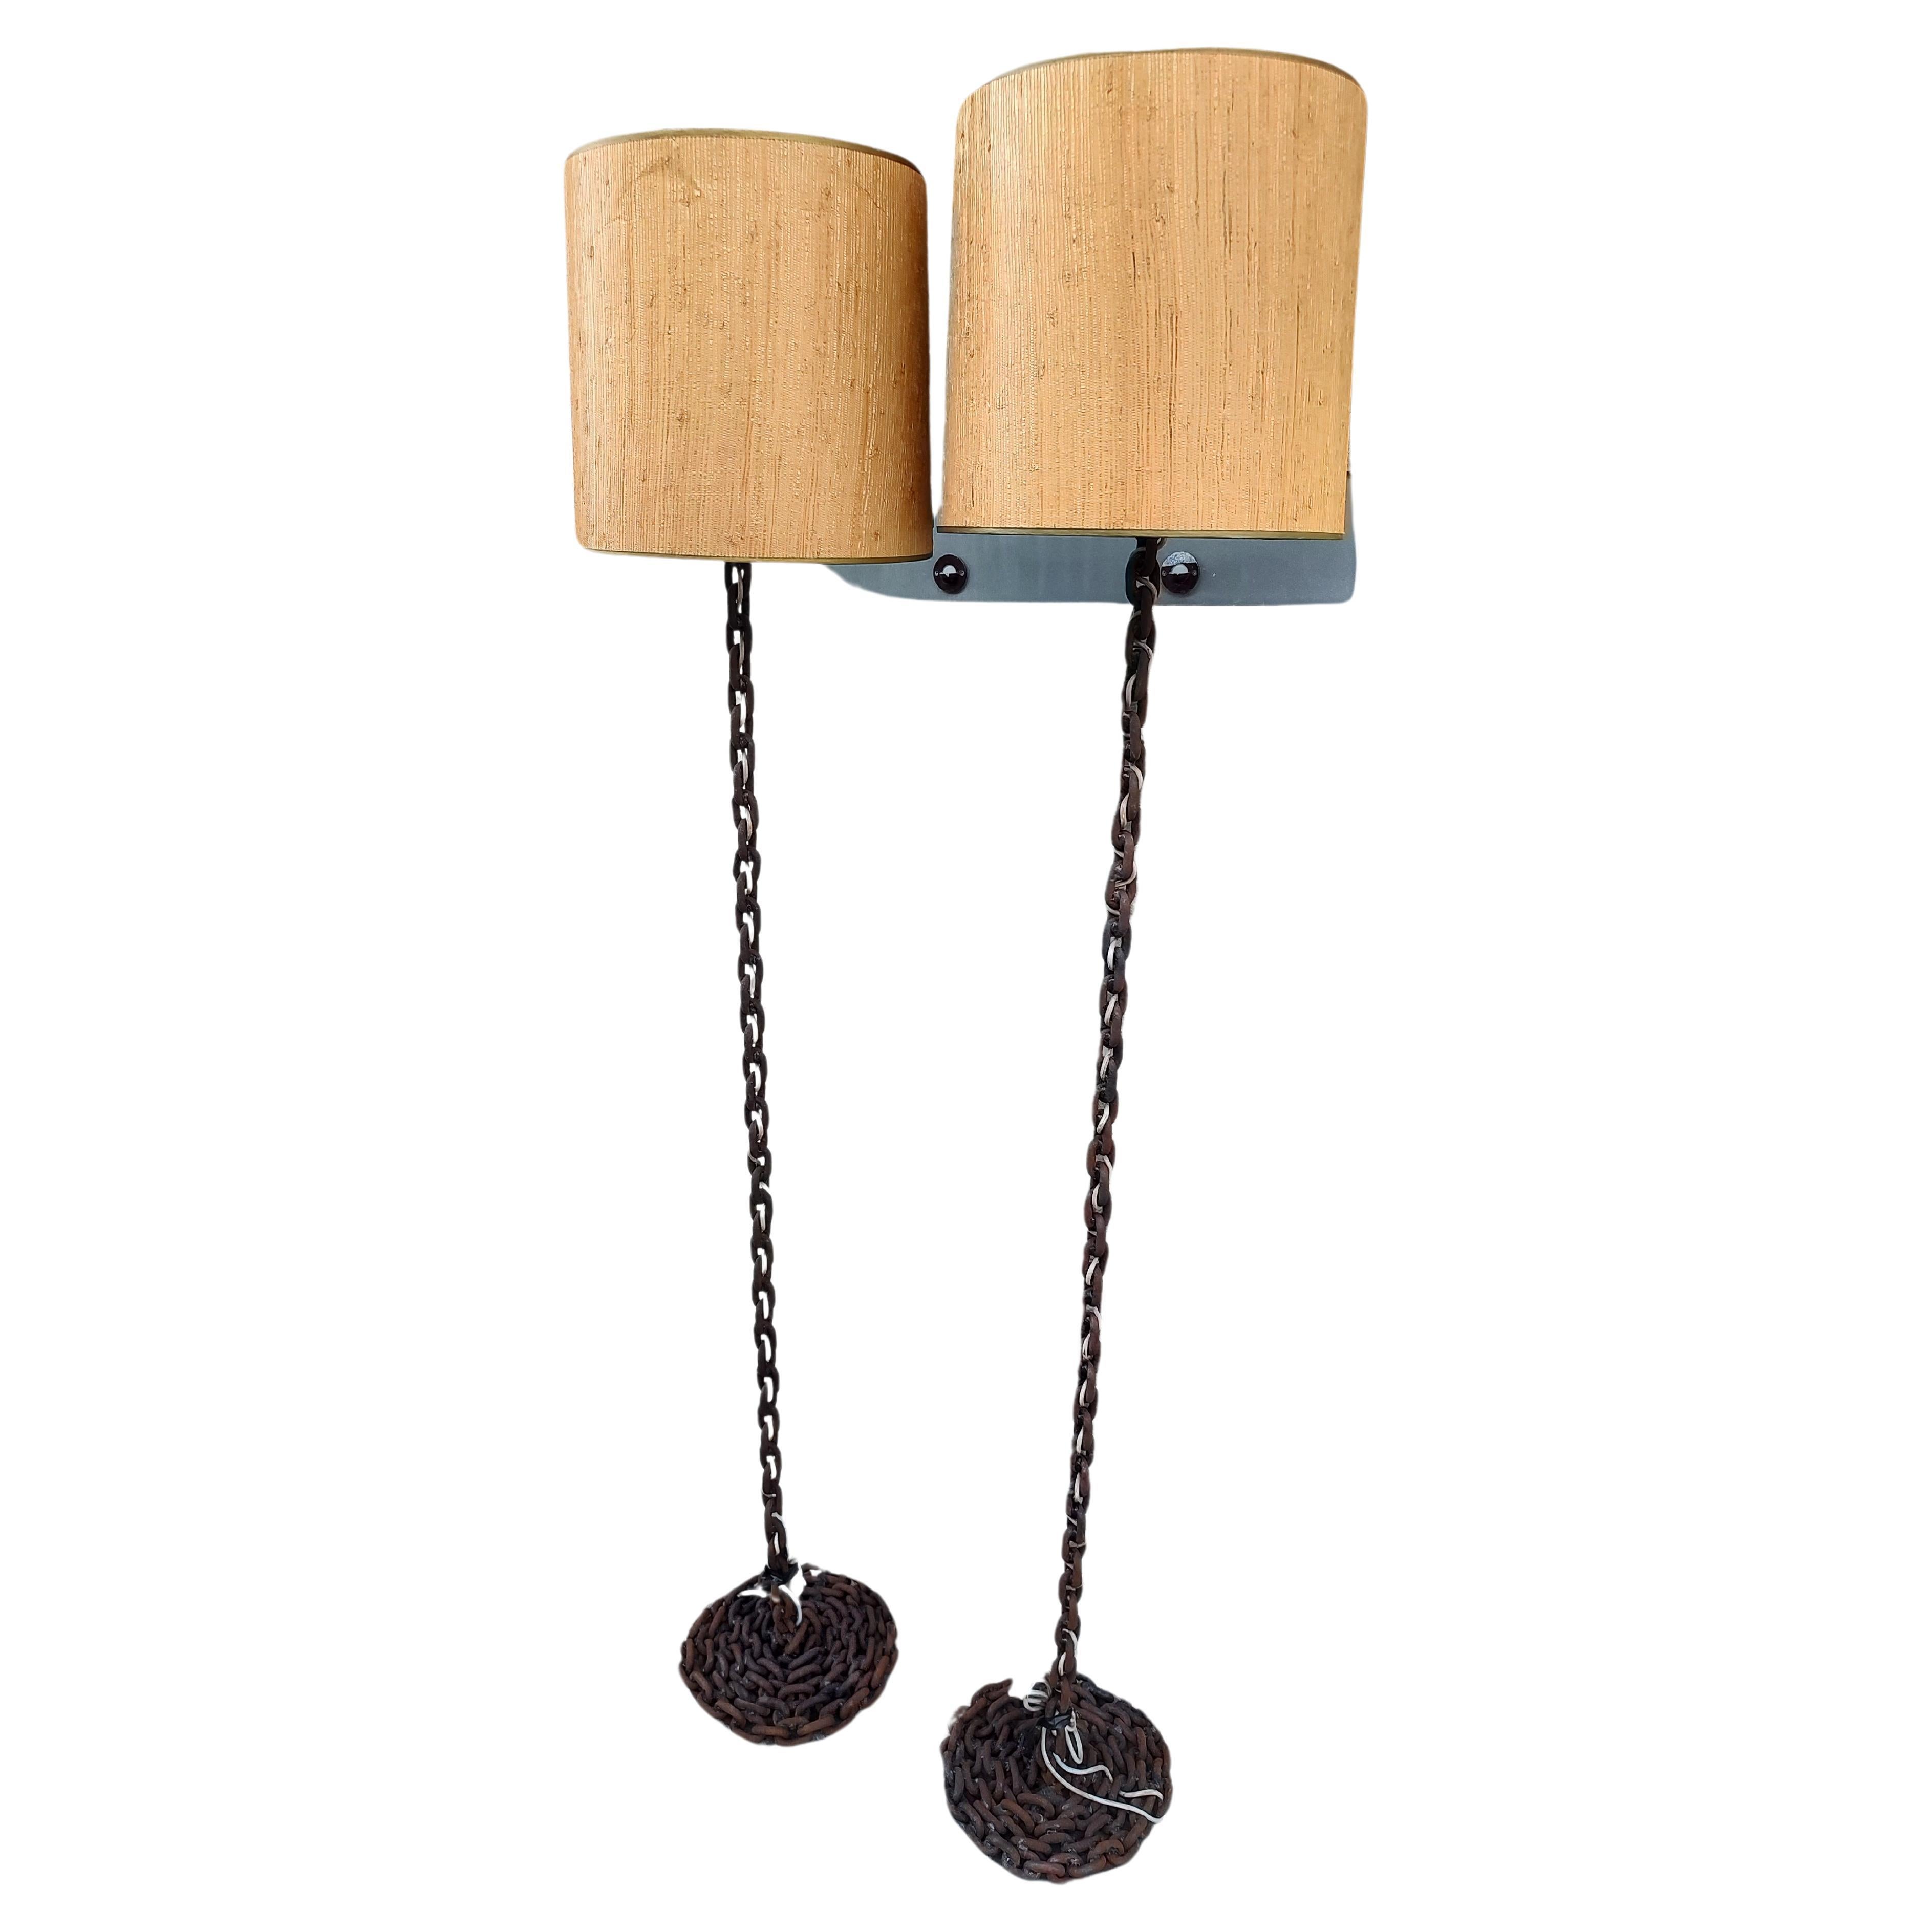 Late 20th Century Pair of Mid-Century Modern Sculptural Brutalist Chain Rope Floor Lamps For Sale